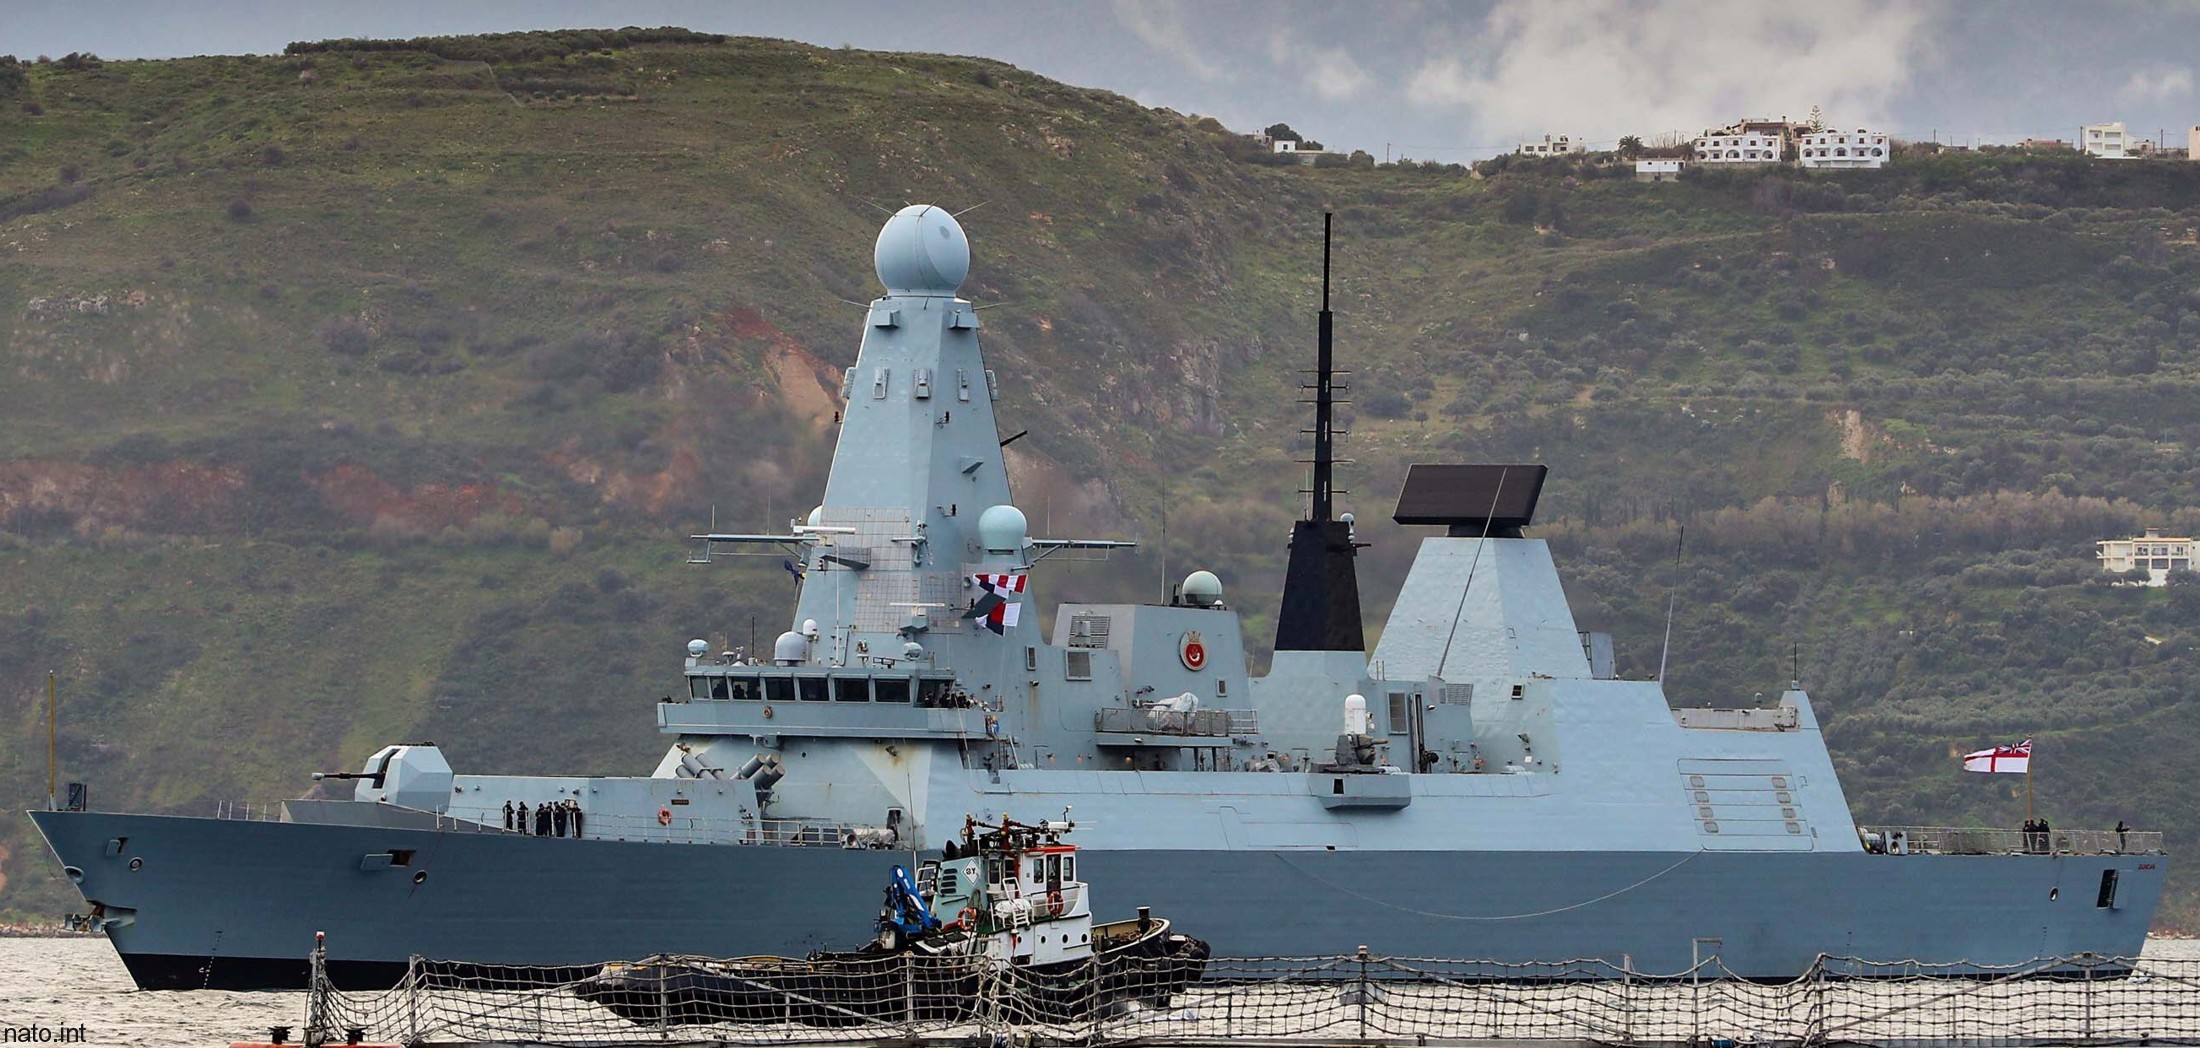 d37 hms duncan d-37 type 45 daring class guided missile destroyer ddg royal navy sea viper 24